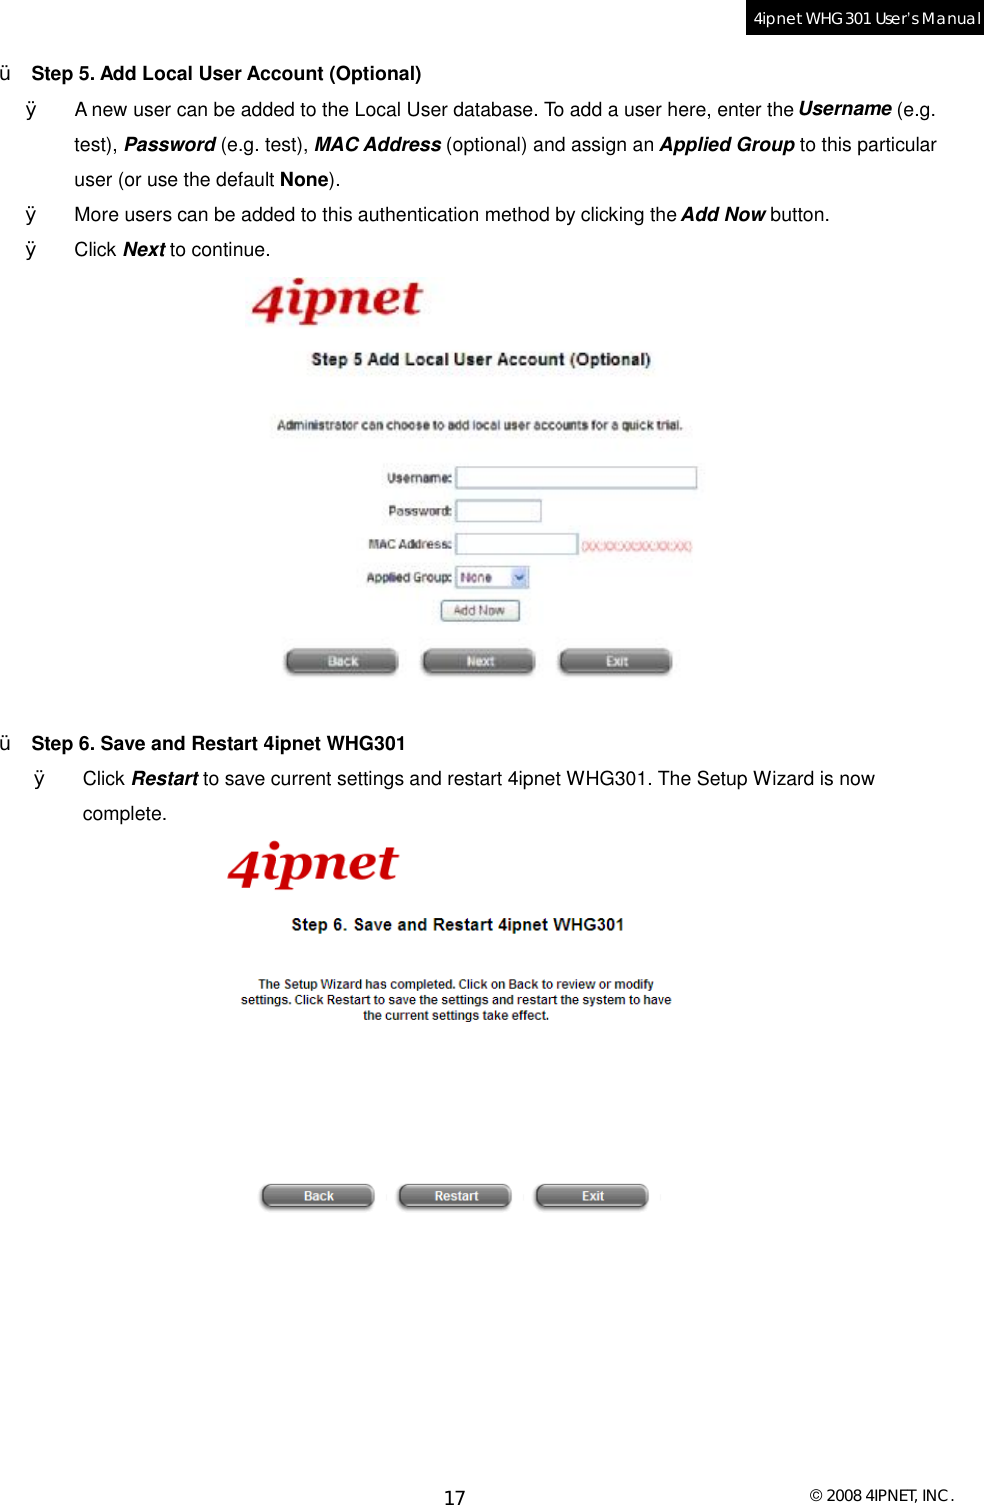  © 2008 4IPNET, INC. 17 4ipnet WHG301 User’s Manual  Ÿ  Step 5. Add Local User Account (Optional) Ø  A new user can be added to the Local User database. To add a user here, enter the Username (e.g. test), Password (e.g. test), MAC Address (optional) and assign an Applied Group to this particular user (or use the default None).  Ø  More users can be added to this authentication method by clicking the Add Now button. Ø  Click Next to continue.   Ÿ  Step 6. Save and Restart 4ipnet WHG301 Ø  Click Restart to save current settings and restart 4ipnet WHG301. The Setup Wizard is now complete.   